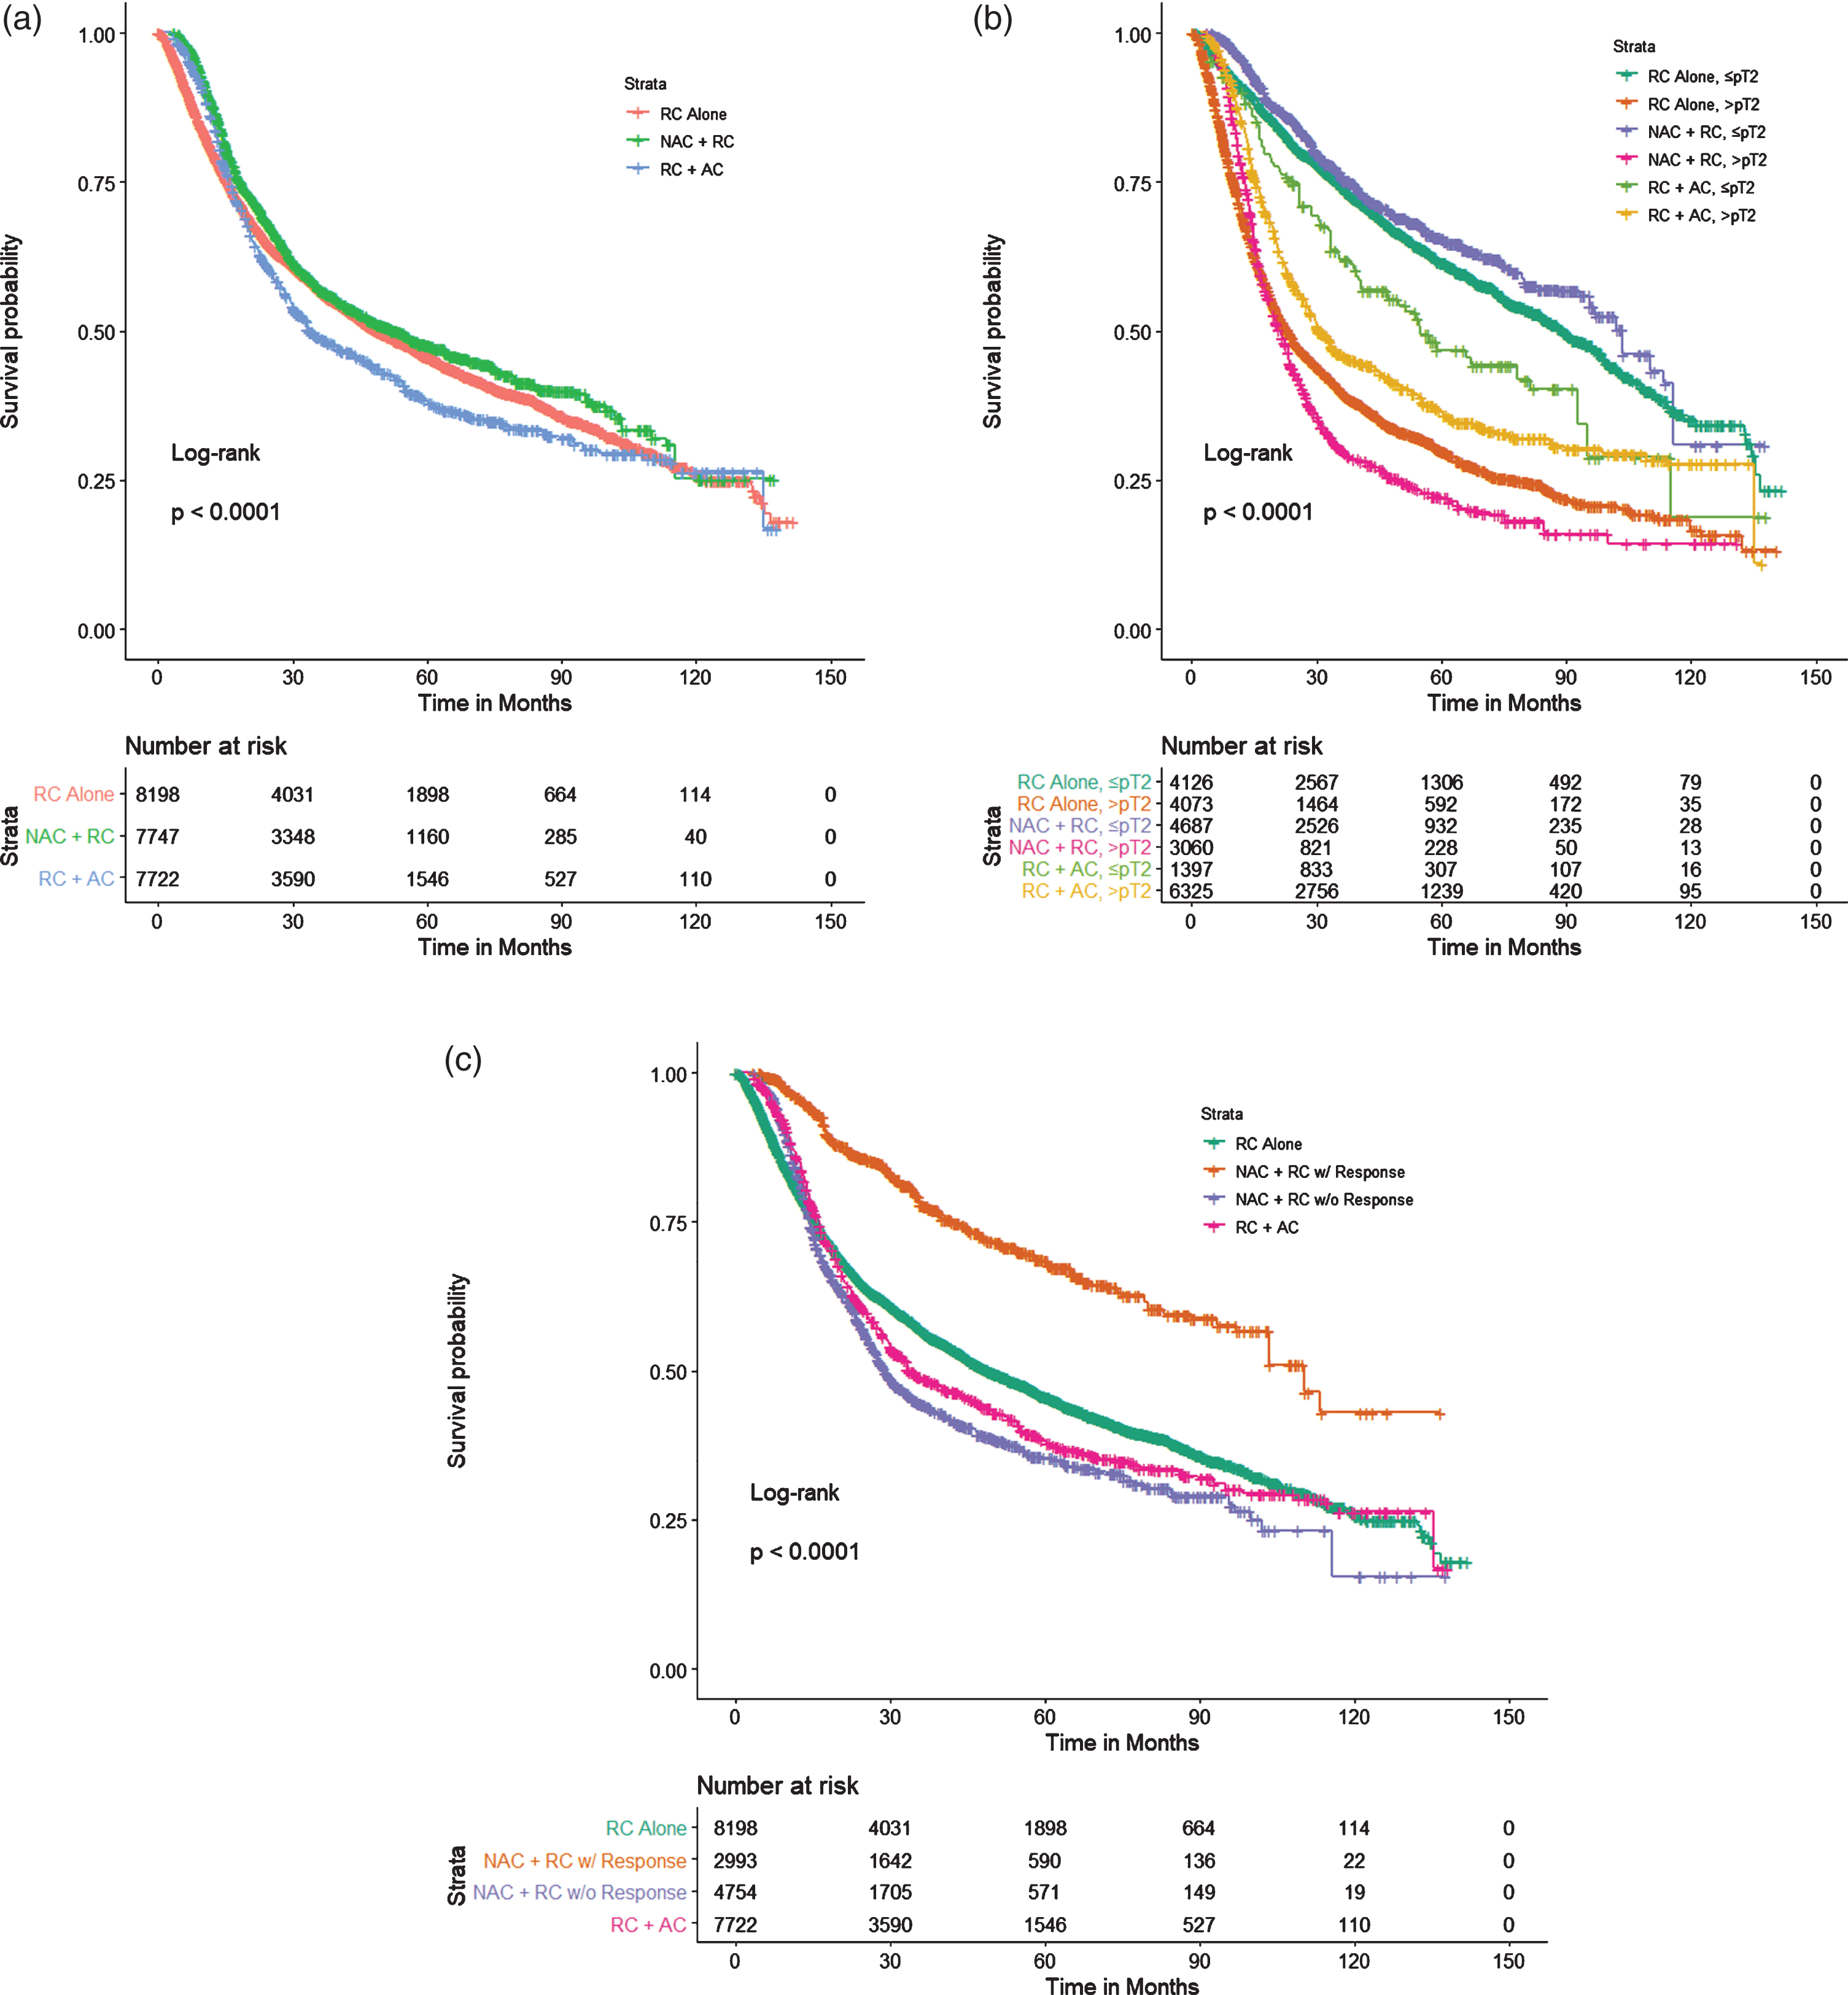 PS-adjusted Kaplan Meier analysis of overall survival for patients treated with NAC + RC vs RC alone vs RC + AC stratified by (a) treatment type, (b) pathological stage (≤pT2 vs. >pT2), and (c) treatment type and response to NAC.